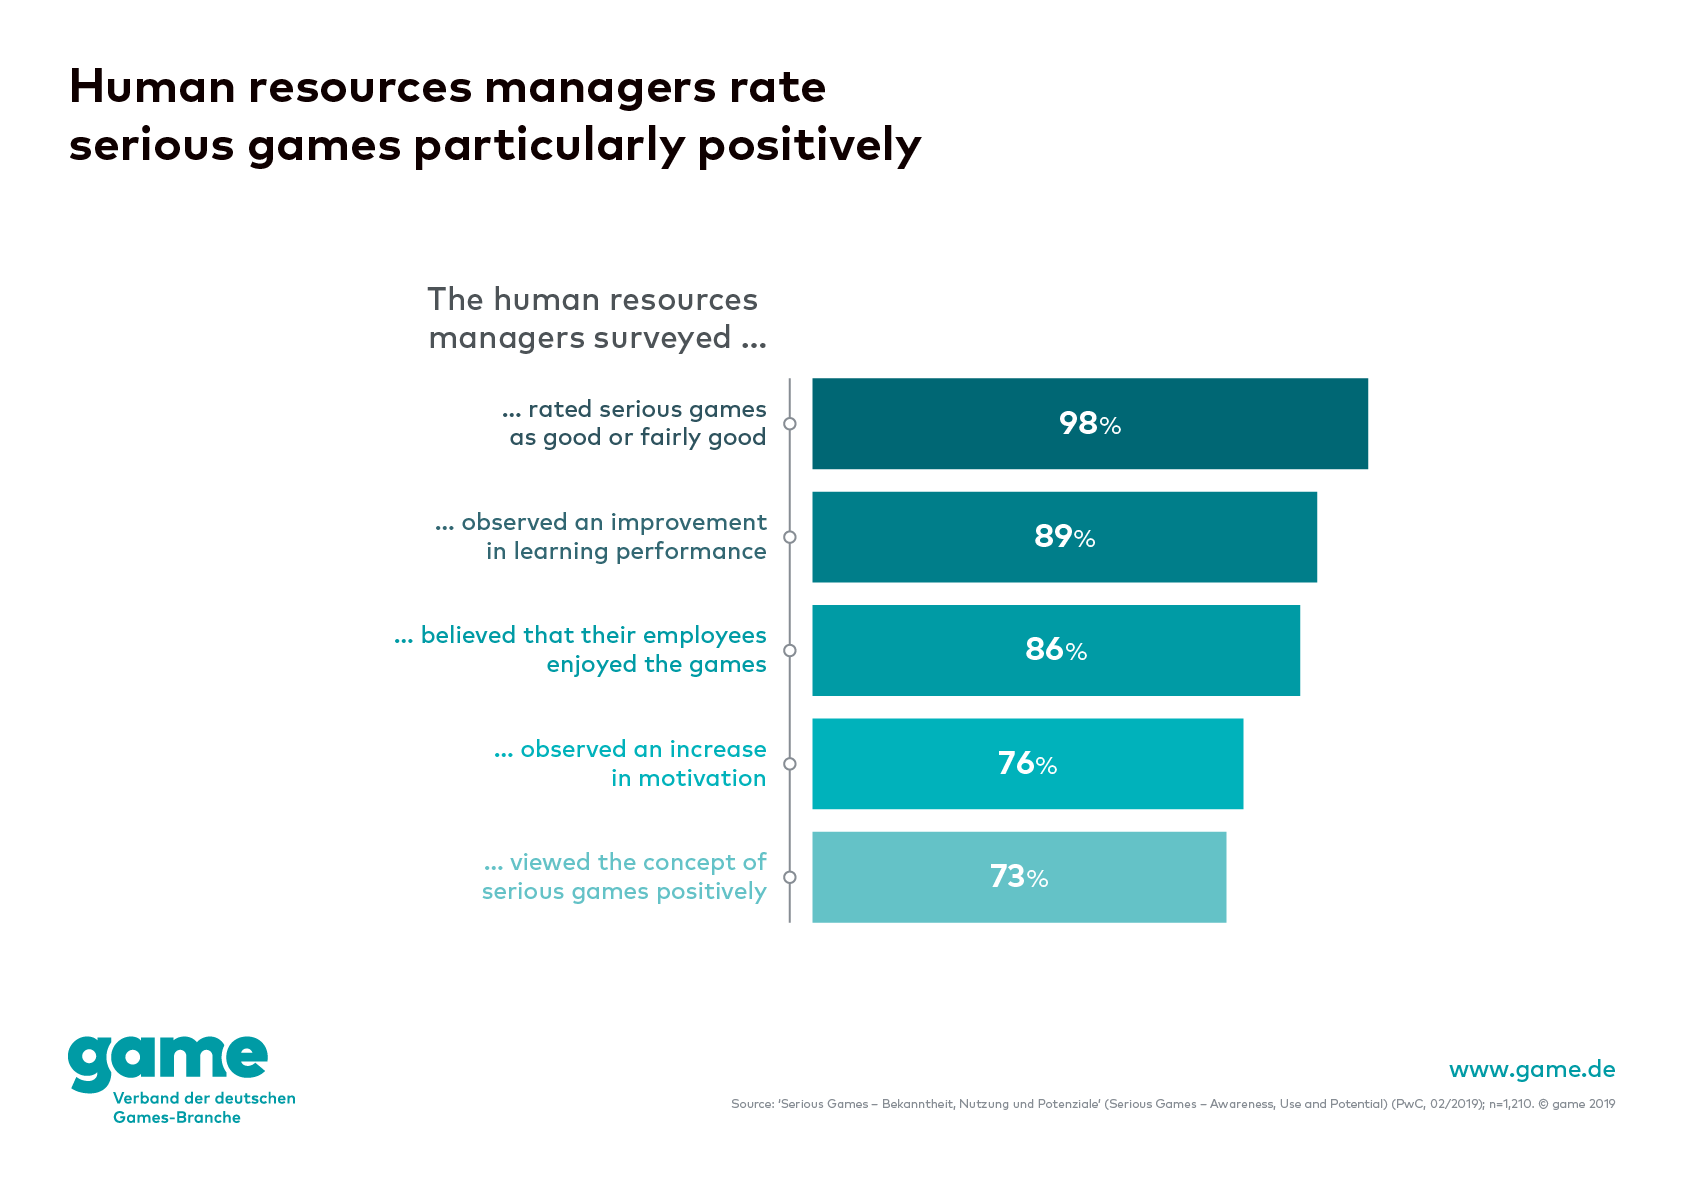 Human resources managers rate serious games particularly positively